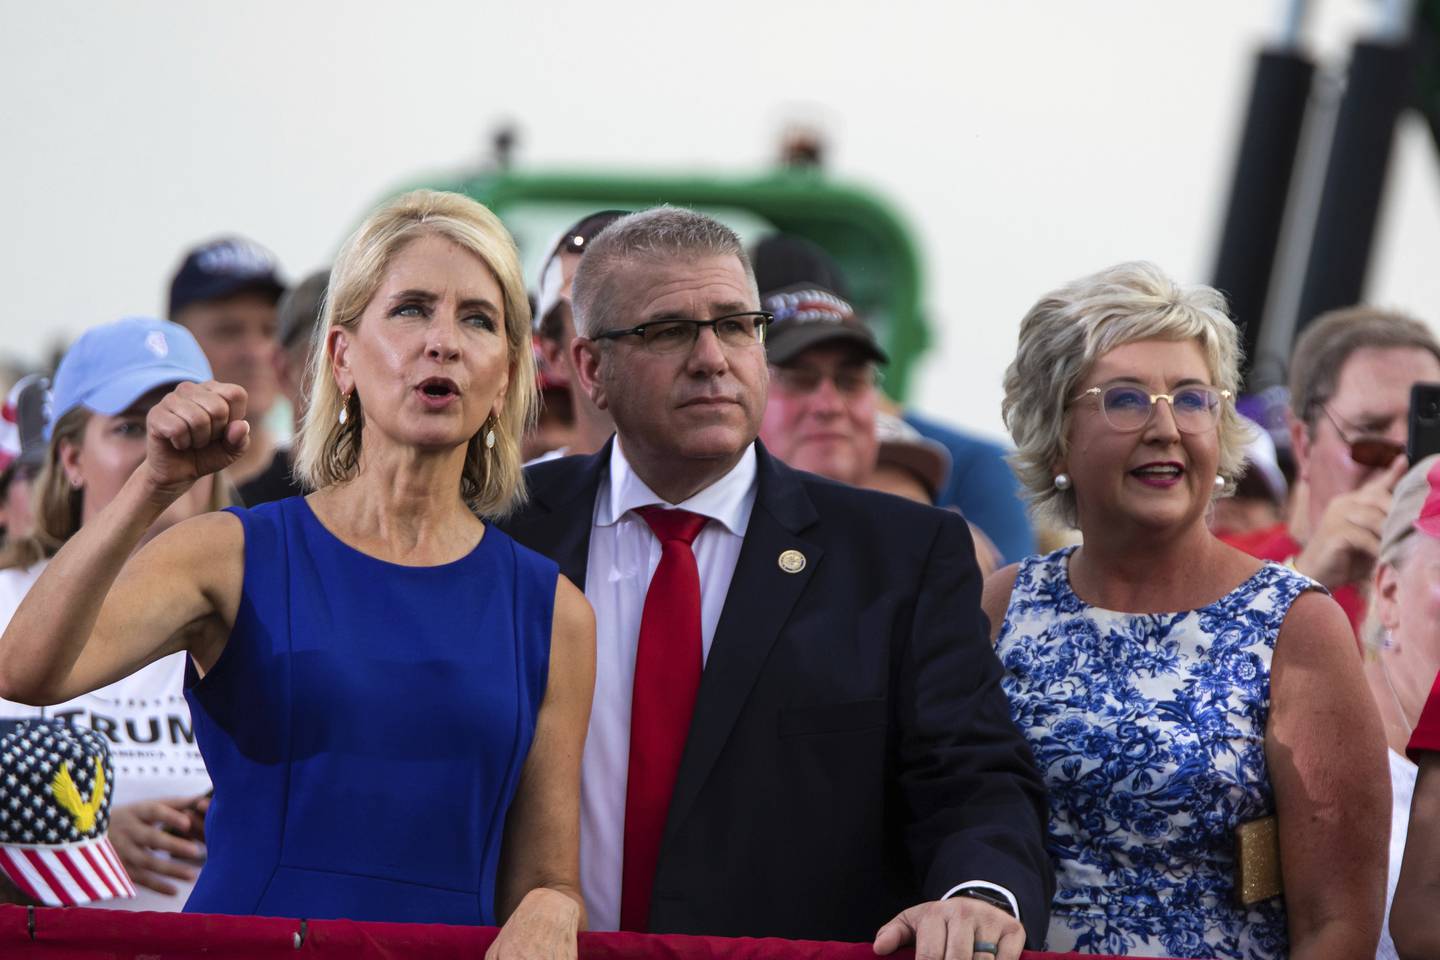 Republican U.S. Rep. Mary Miller, of Illinois, left, cheers next to Illinois state Sen. Darren Bailey at a rally where former President Donald Trump spoke, at the Adams County Fairgrounds in Mendon, Ill., Saturday, June 25, 2022. (Mike Sorensen/Quincy Herald-Whig via AP)